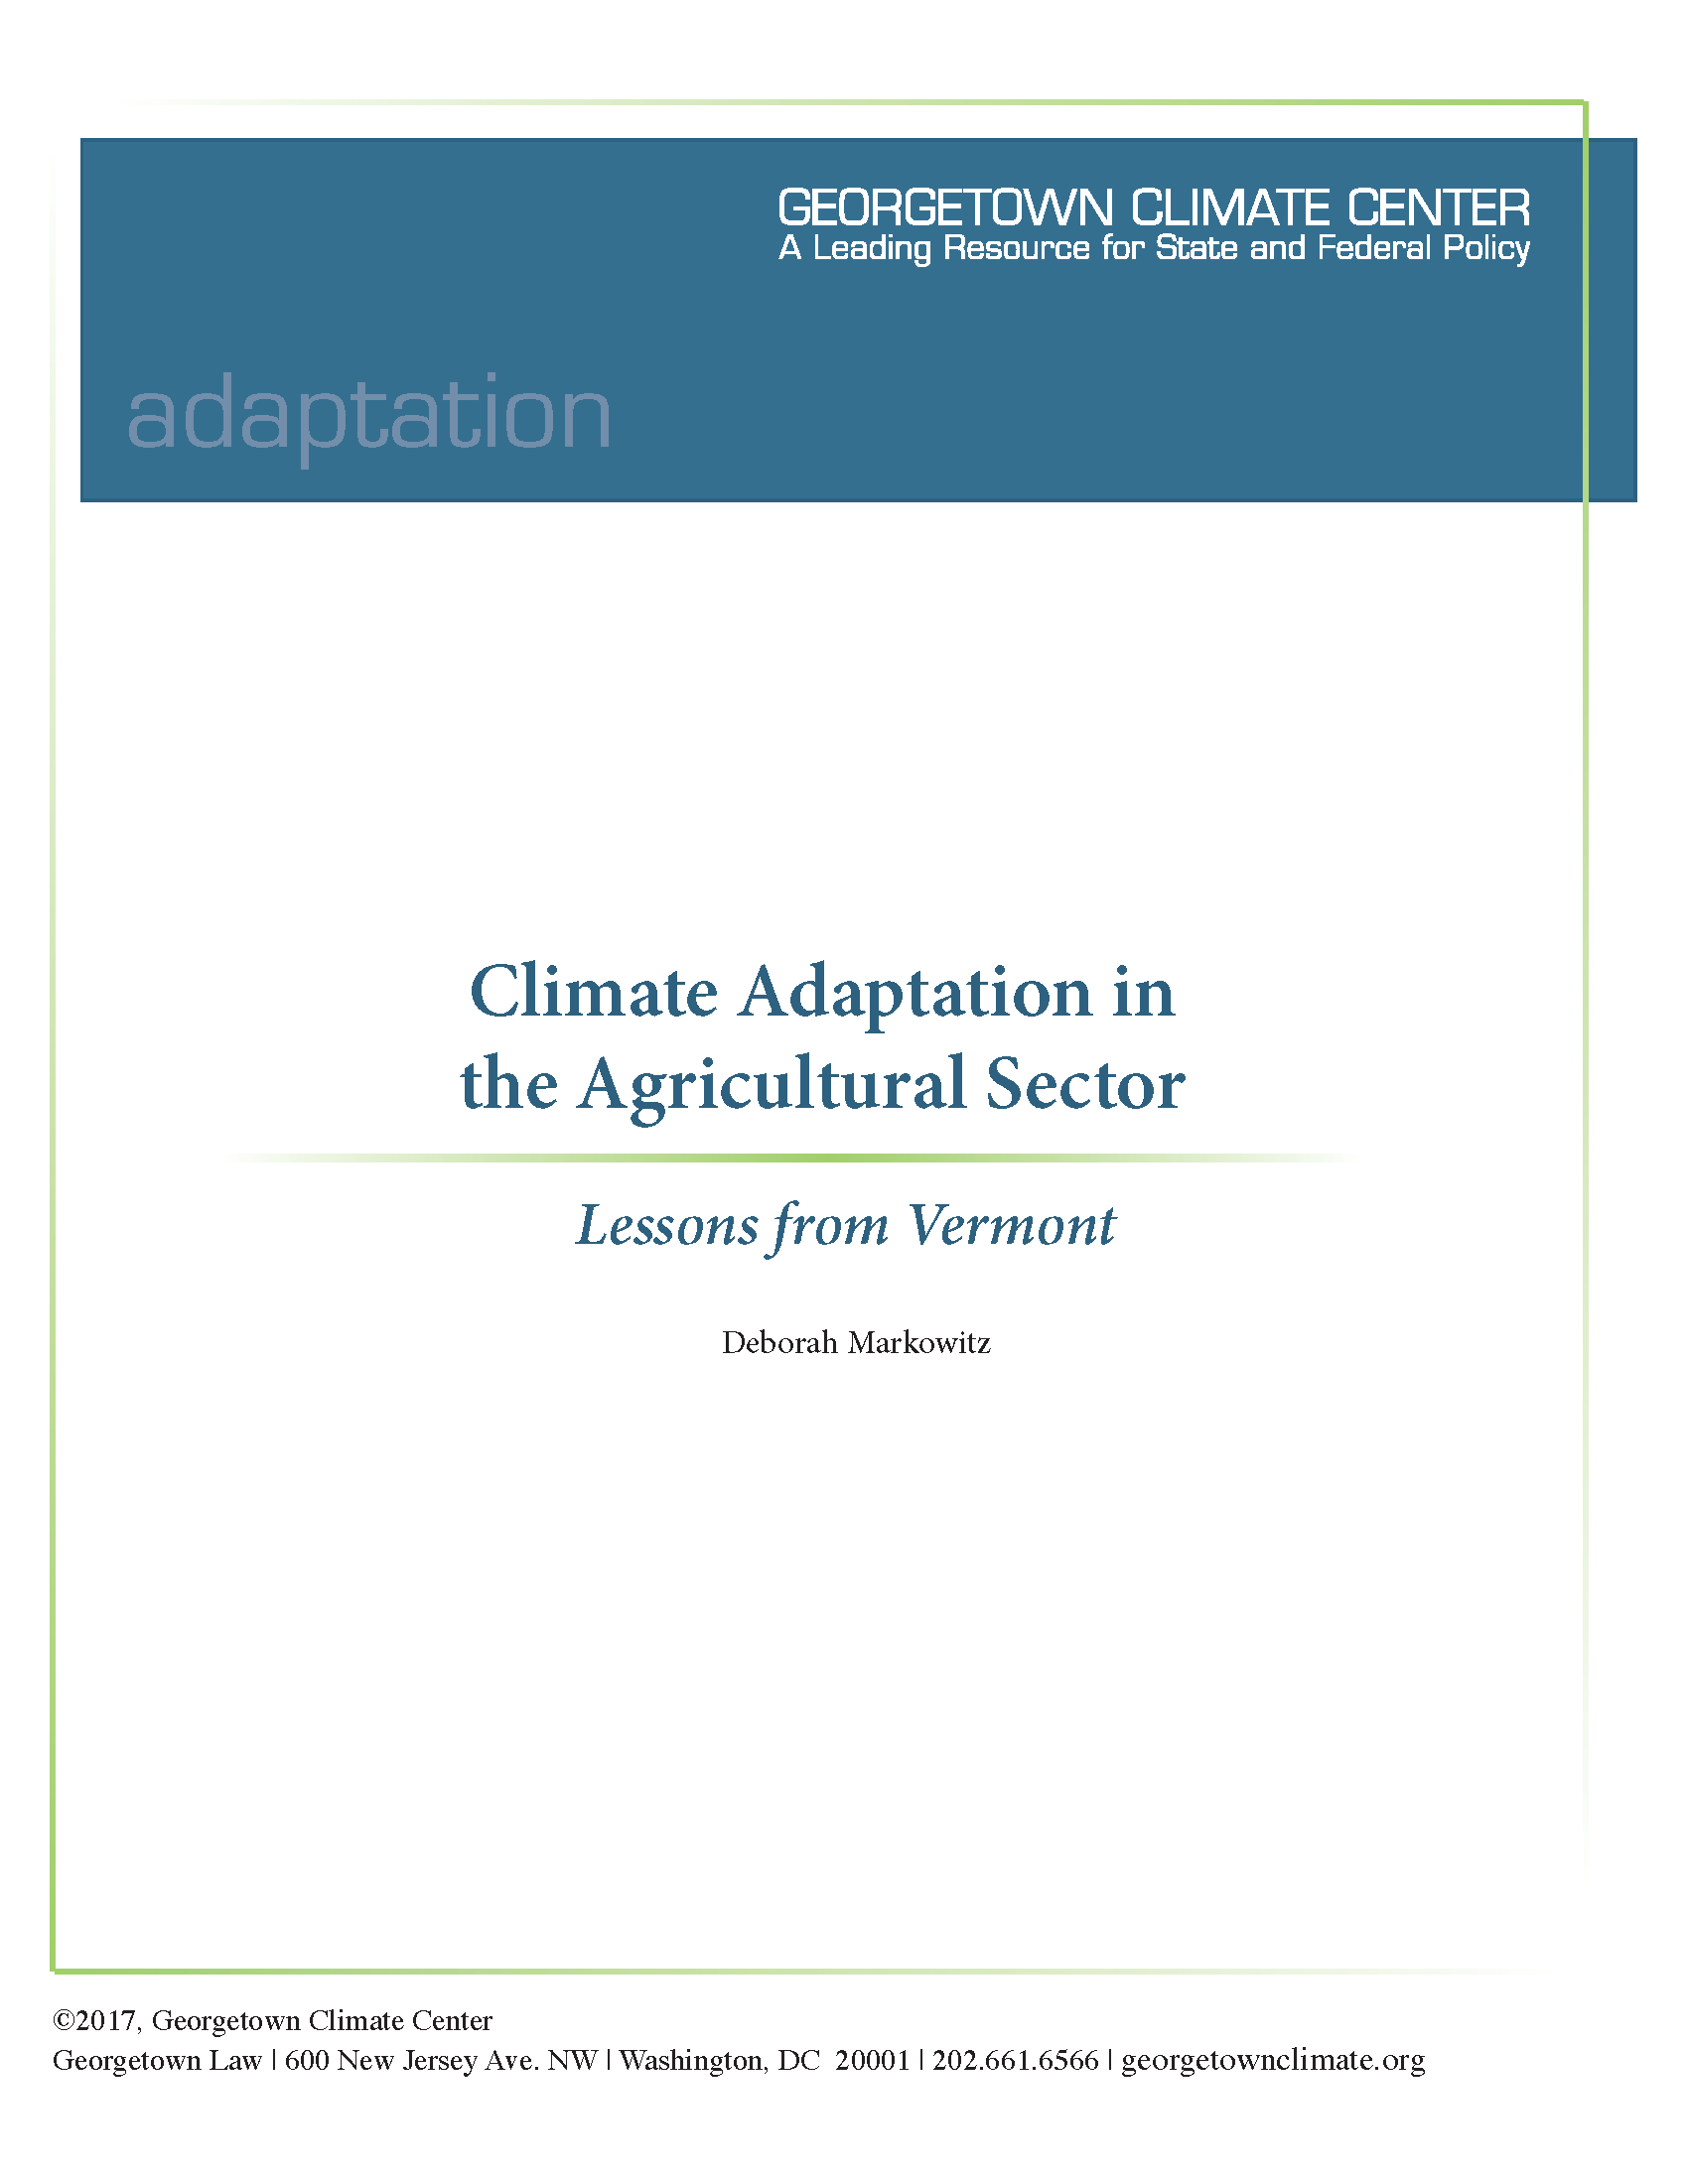 Climate Adaptation in the Agricultural Sector: Lessons from Vermont